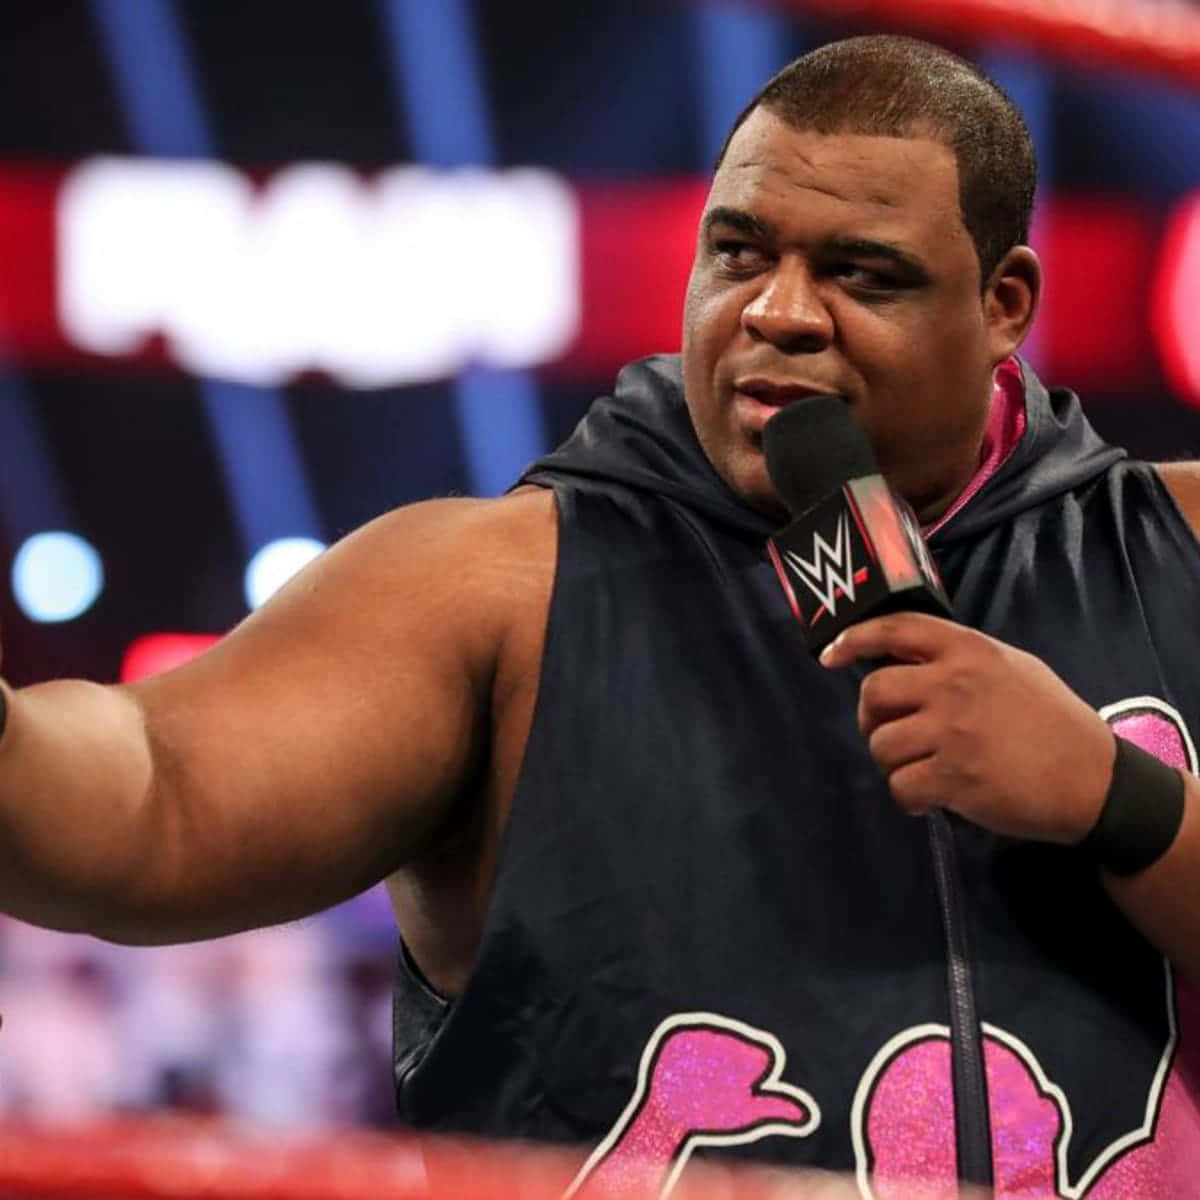 Keithlee Reagerar På En Wwe-fan (context Is Unclear As To How This Relates To Computer Or Mobile Wallpaper) Wallpaper